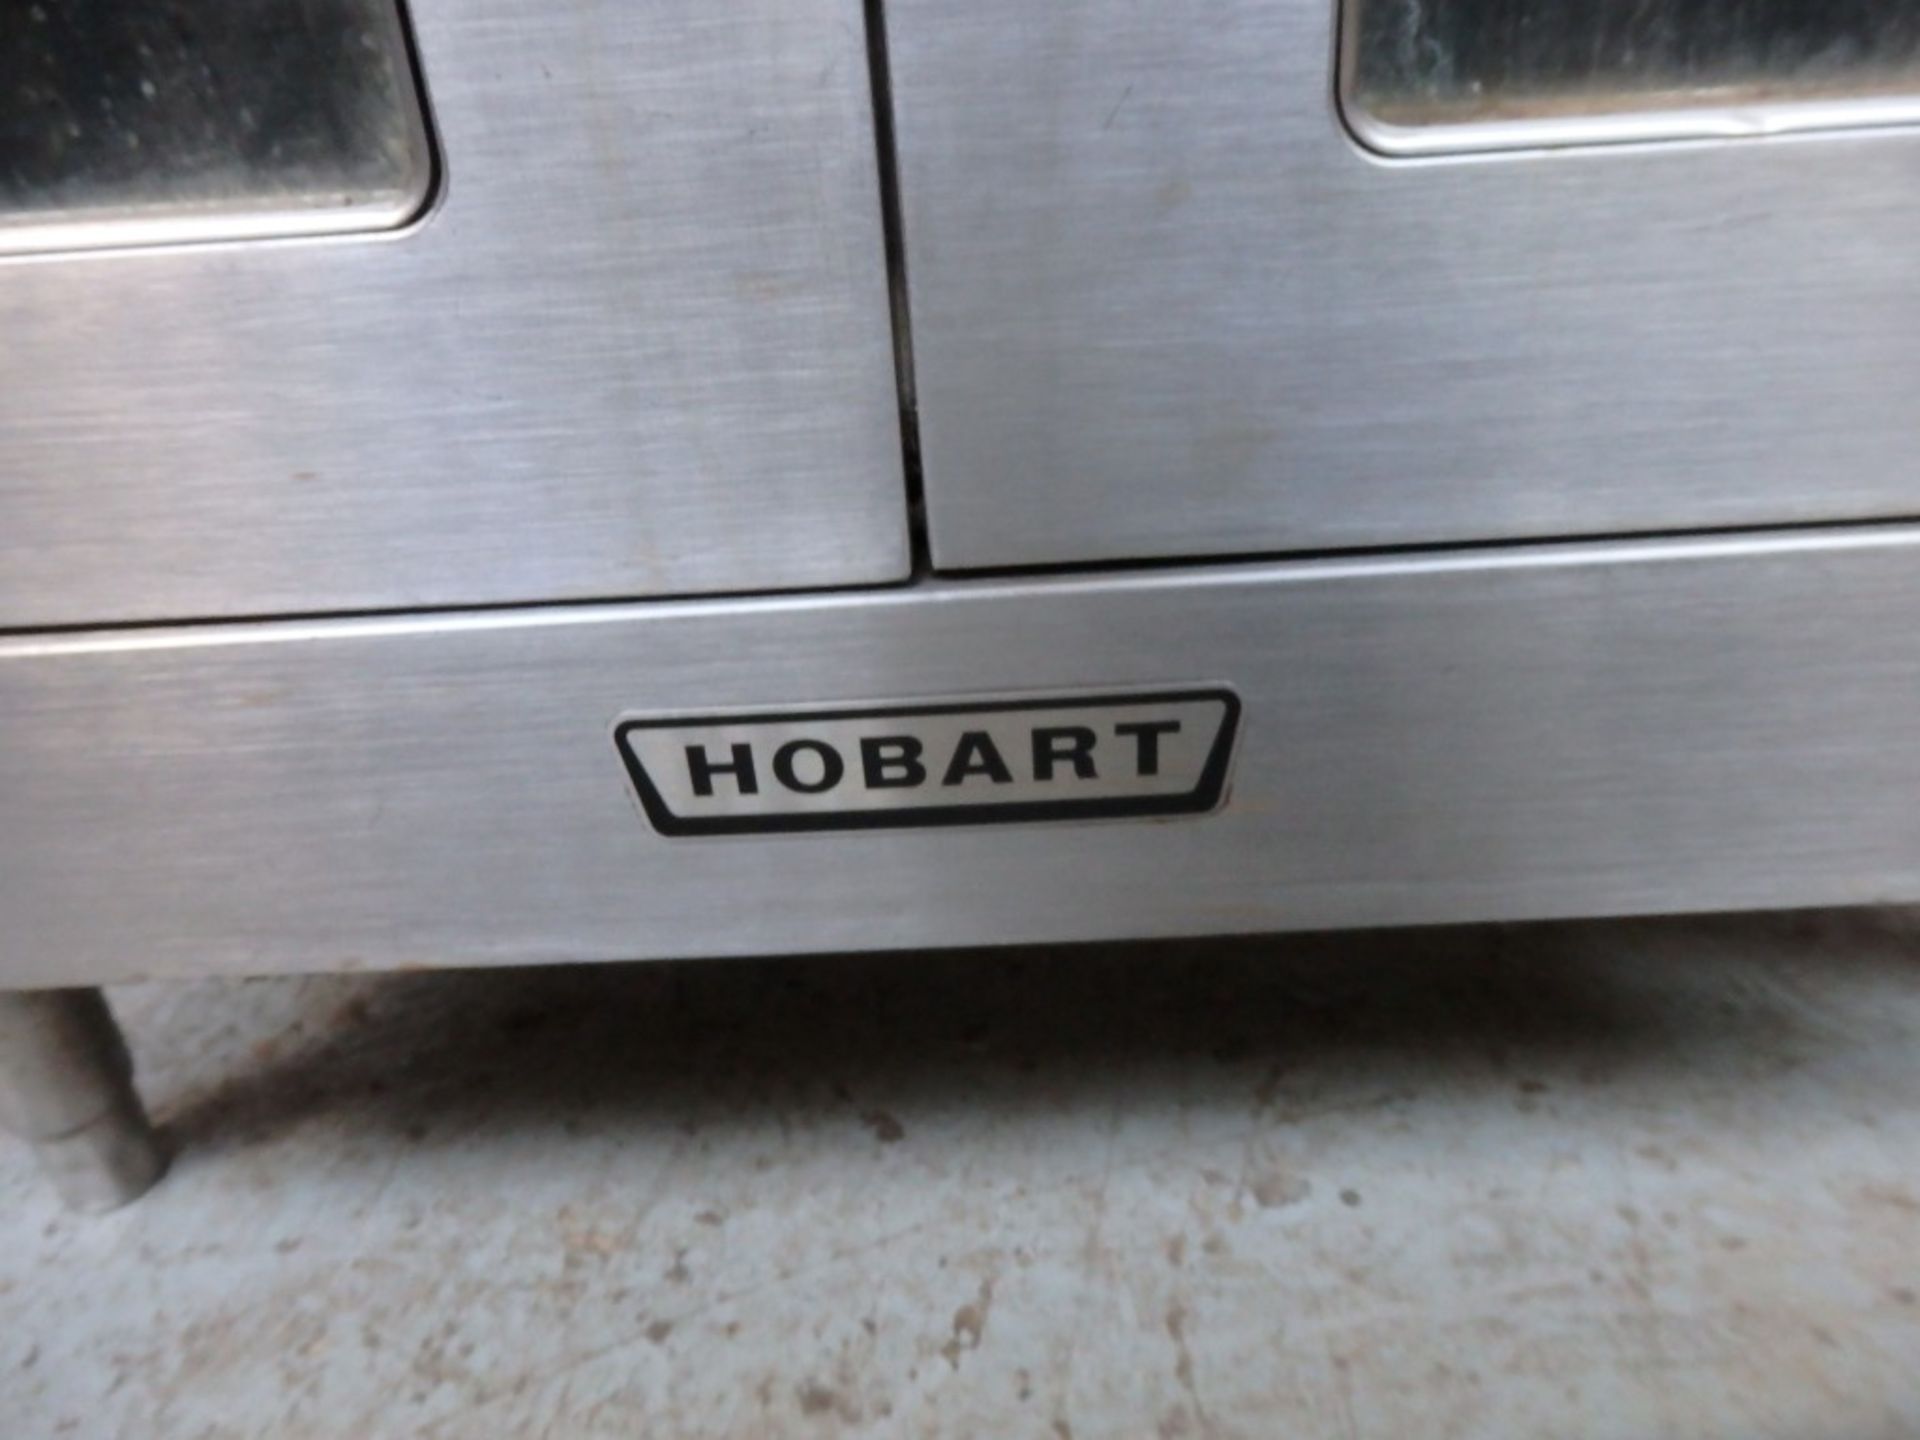 1 x Hobart Industrial Stainless Steel Oven With Temperature Control - Dimensions (Approx): H94 x W98 - Image 5 of 12